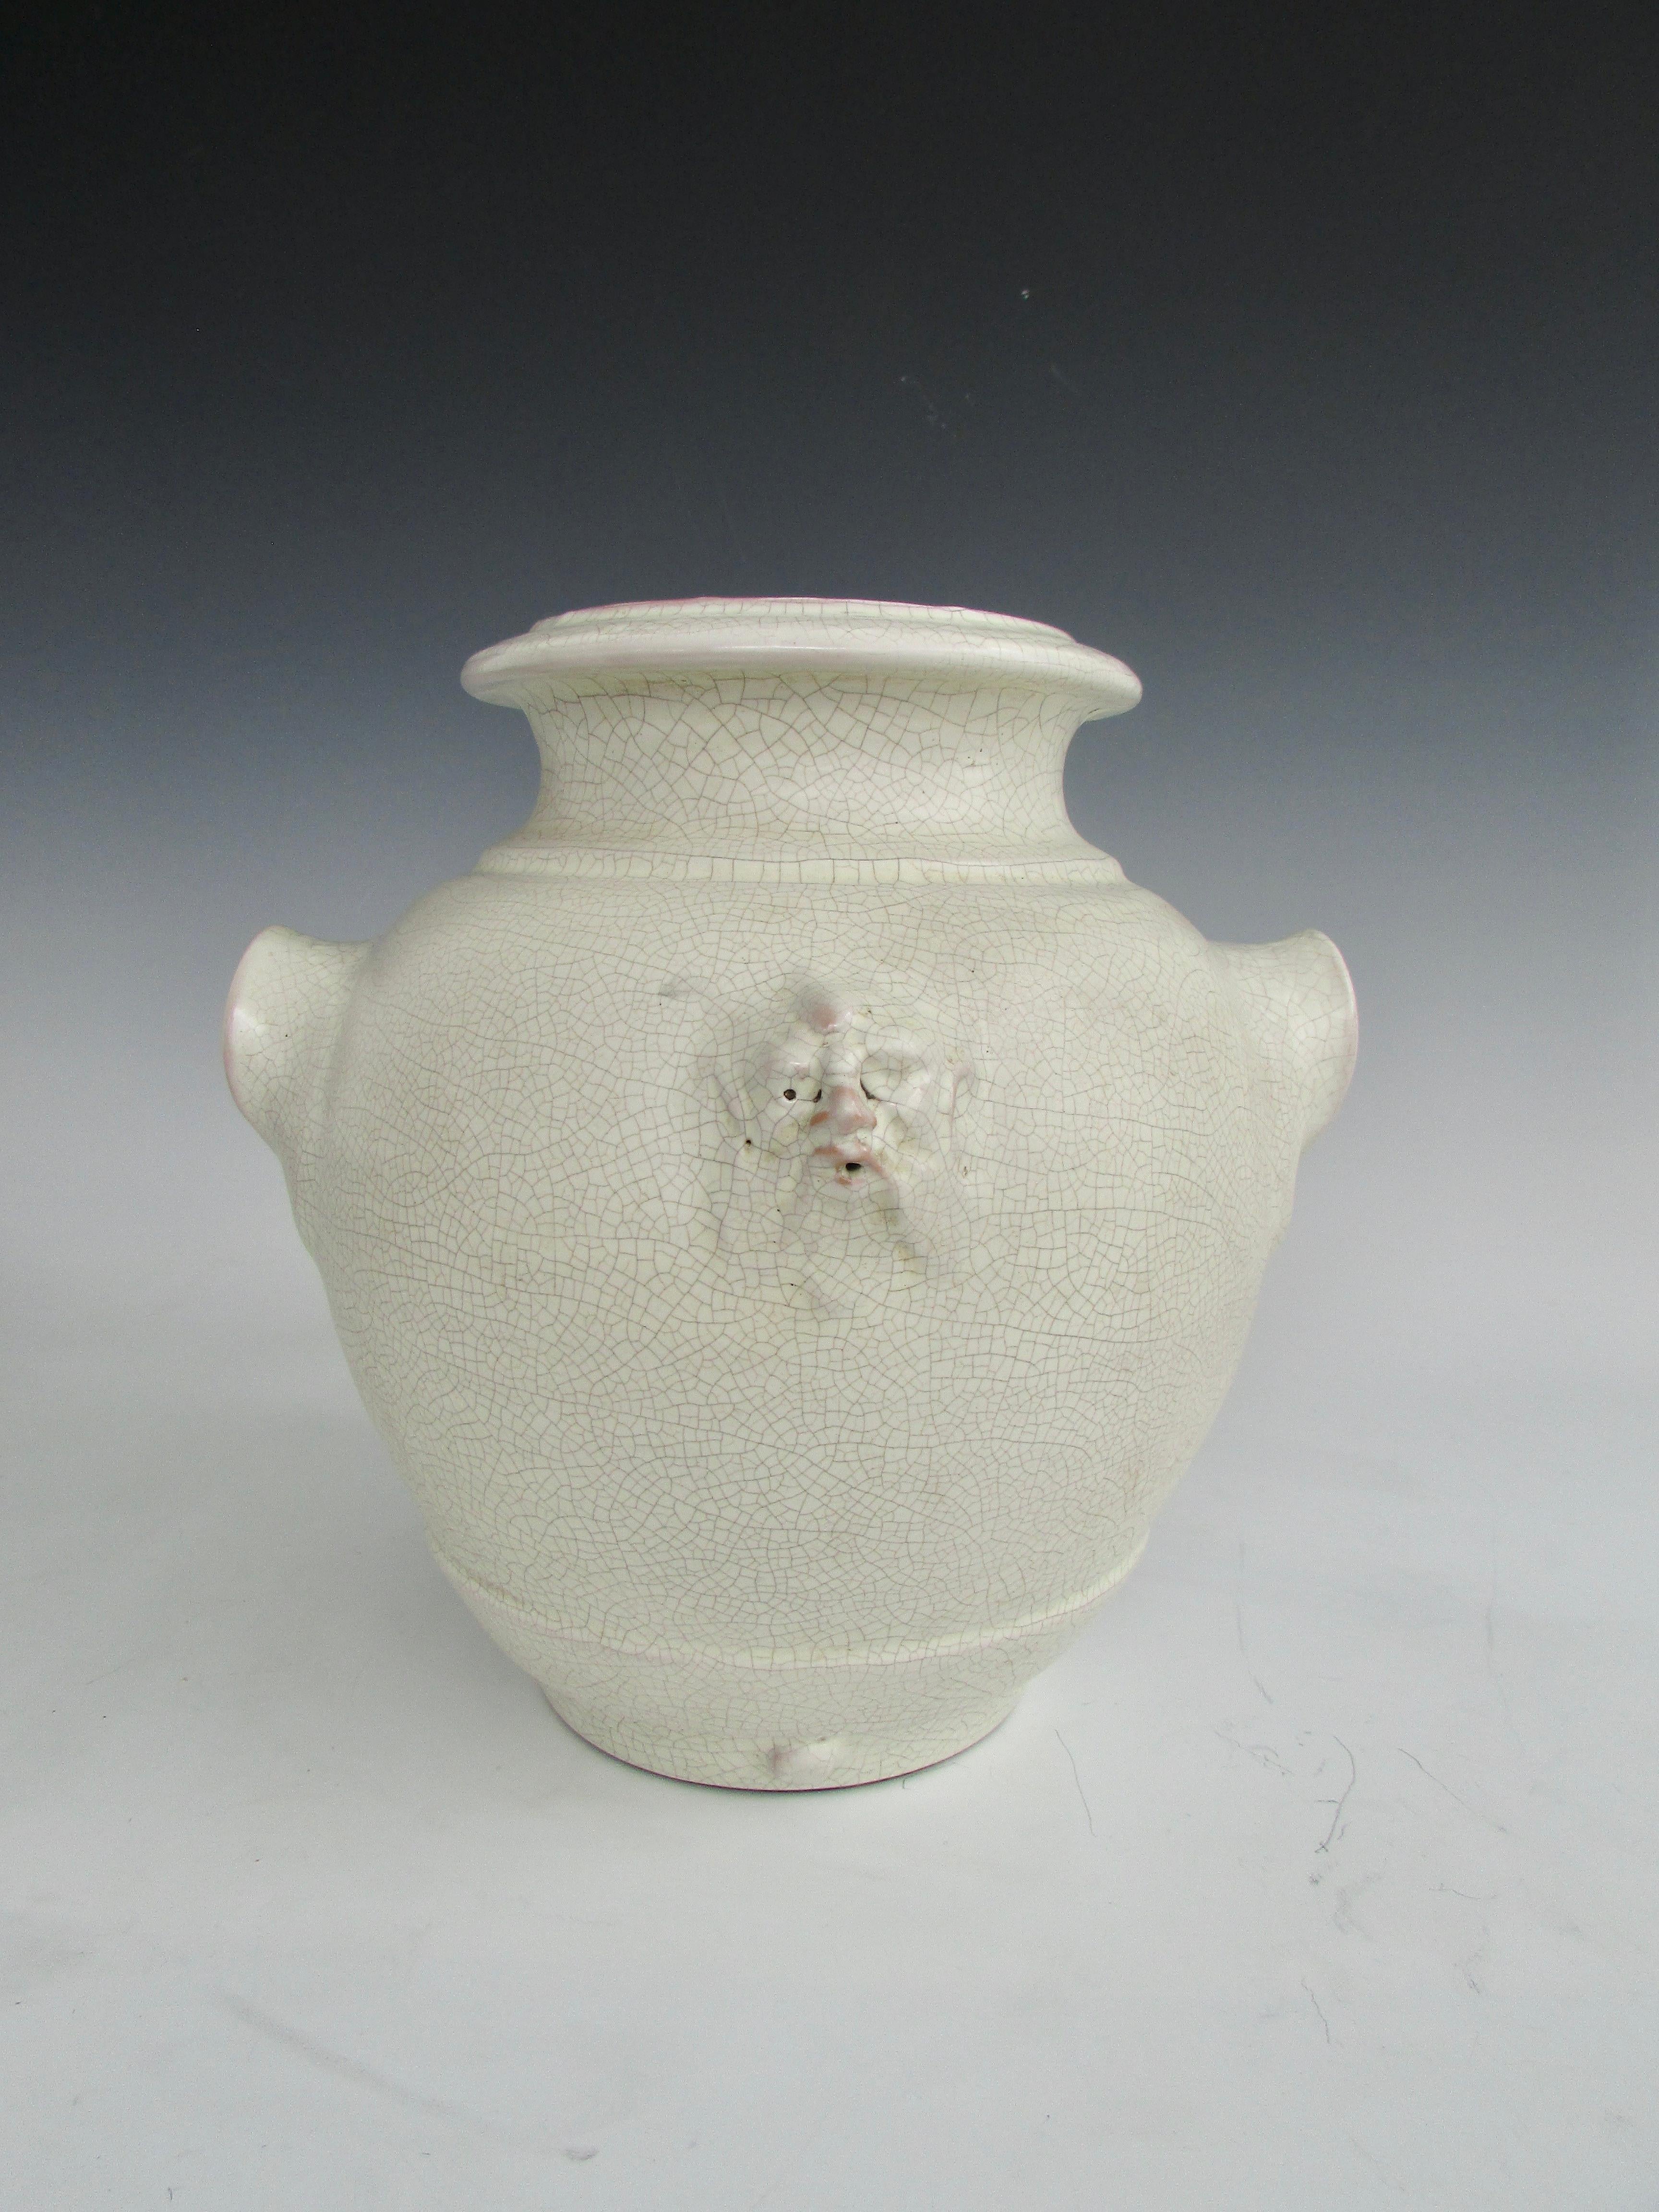 Bulbous Italian pottery vase or urn. Signed made in Italy for Tutto Bene, 1830.